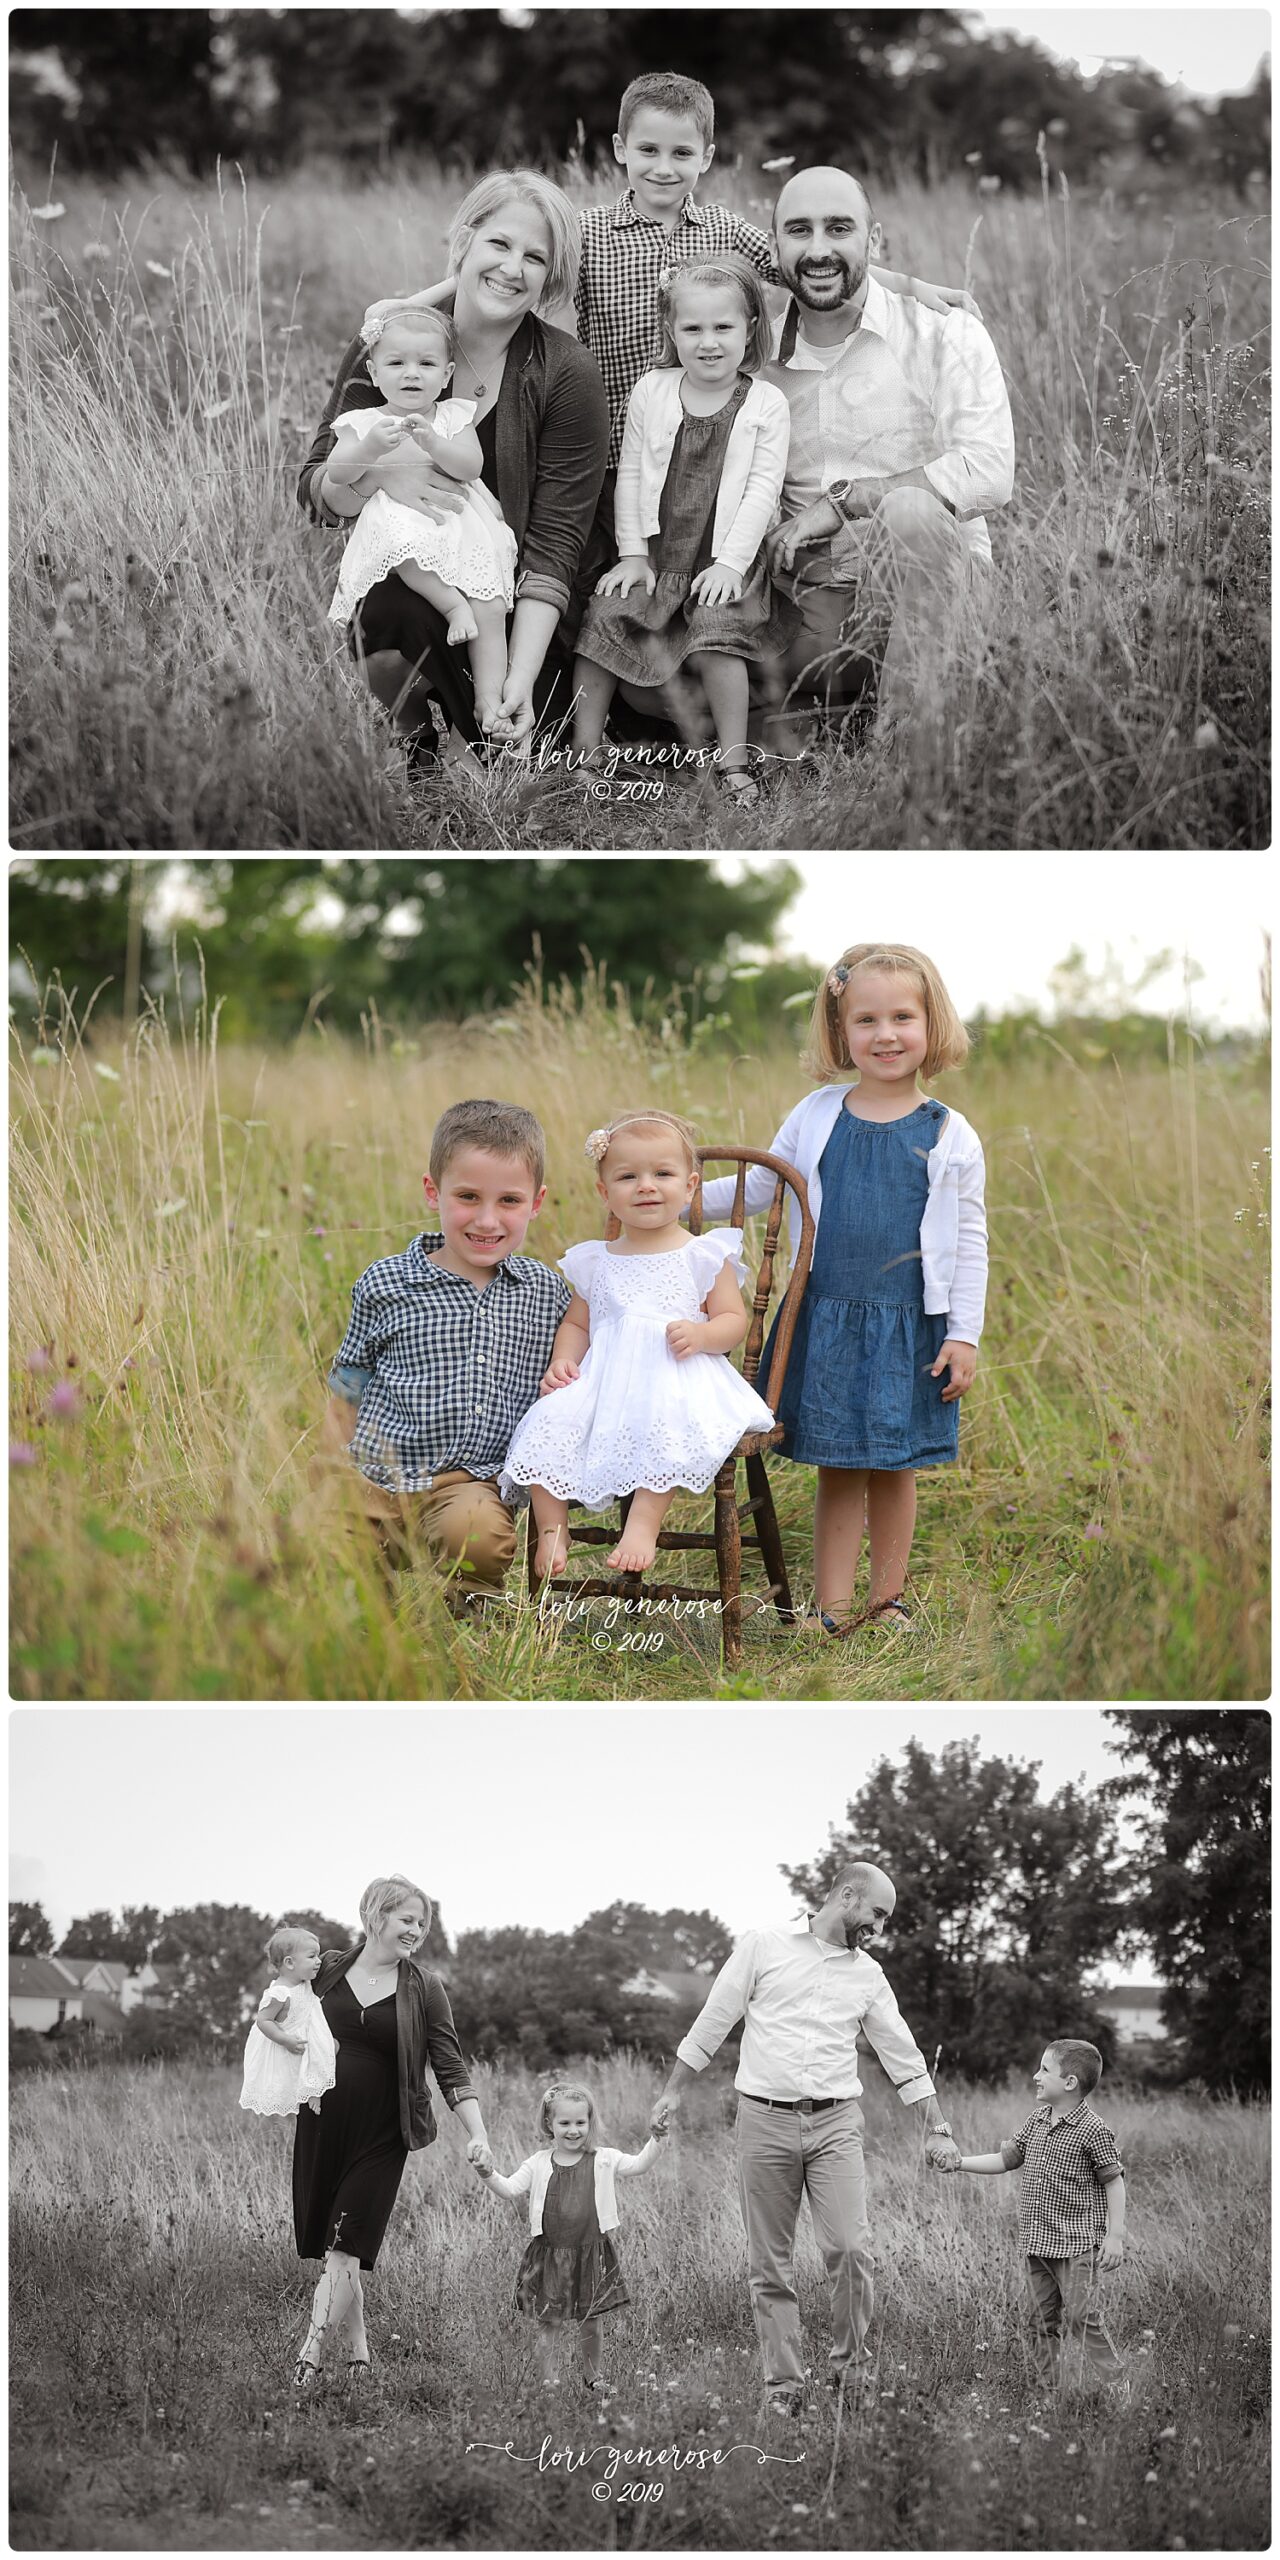 Celebrating little Miss Eliza’s first birthday, these guys snuck in some family shots too! These kids are all so awesome, it’s always a pleasure to capture this sweet family!